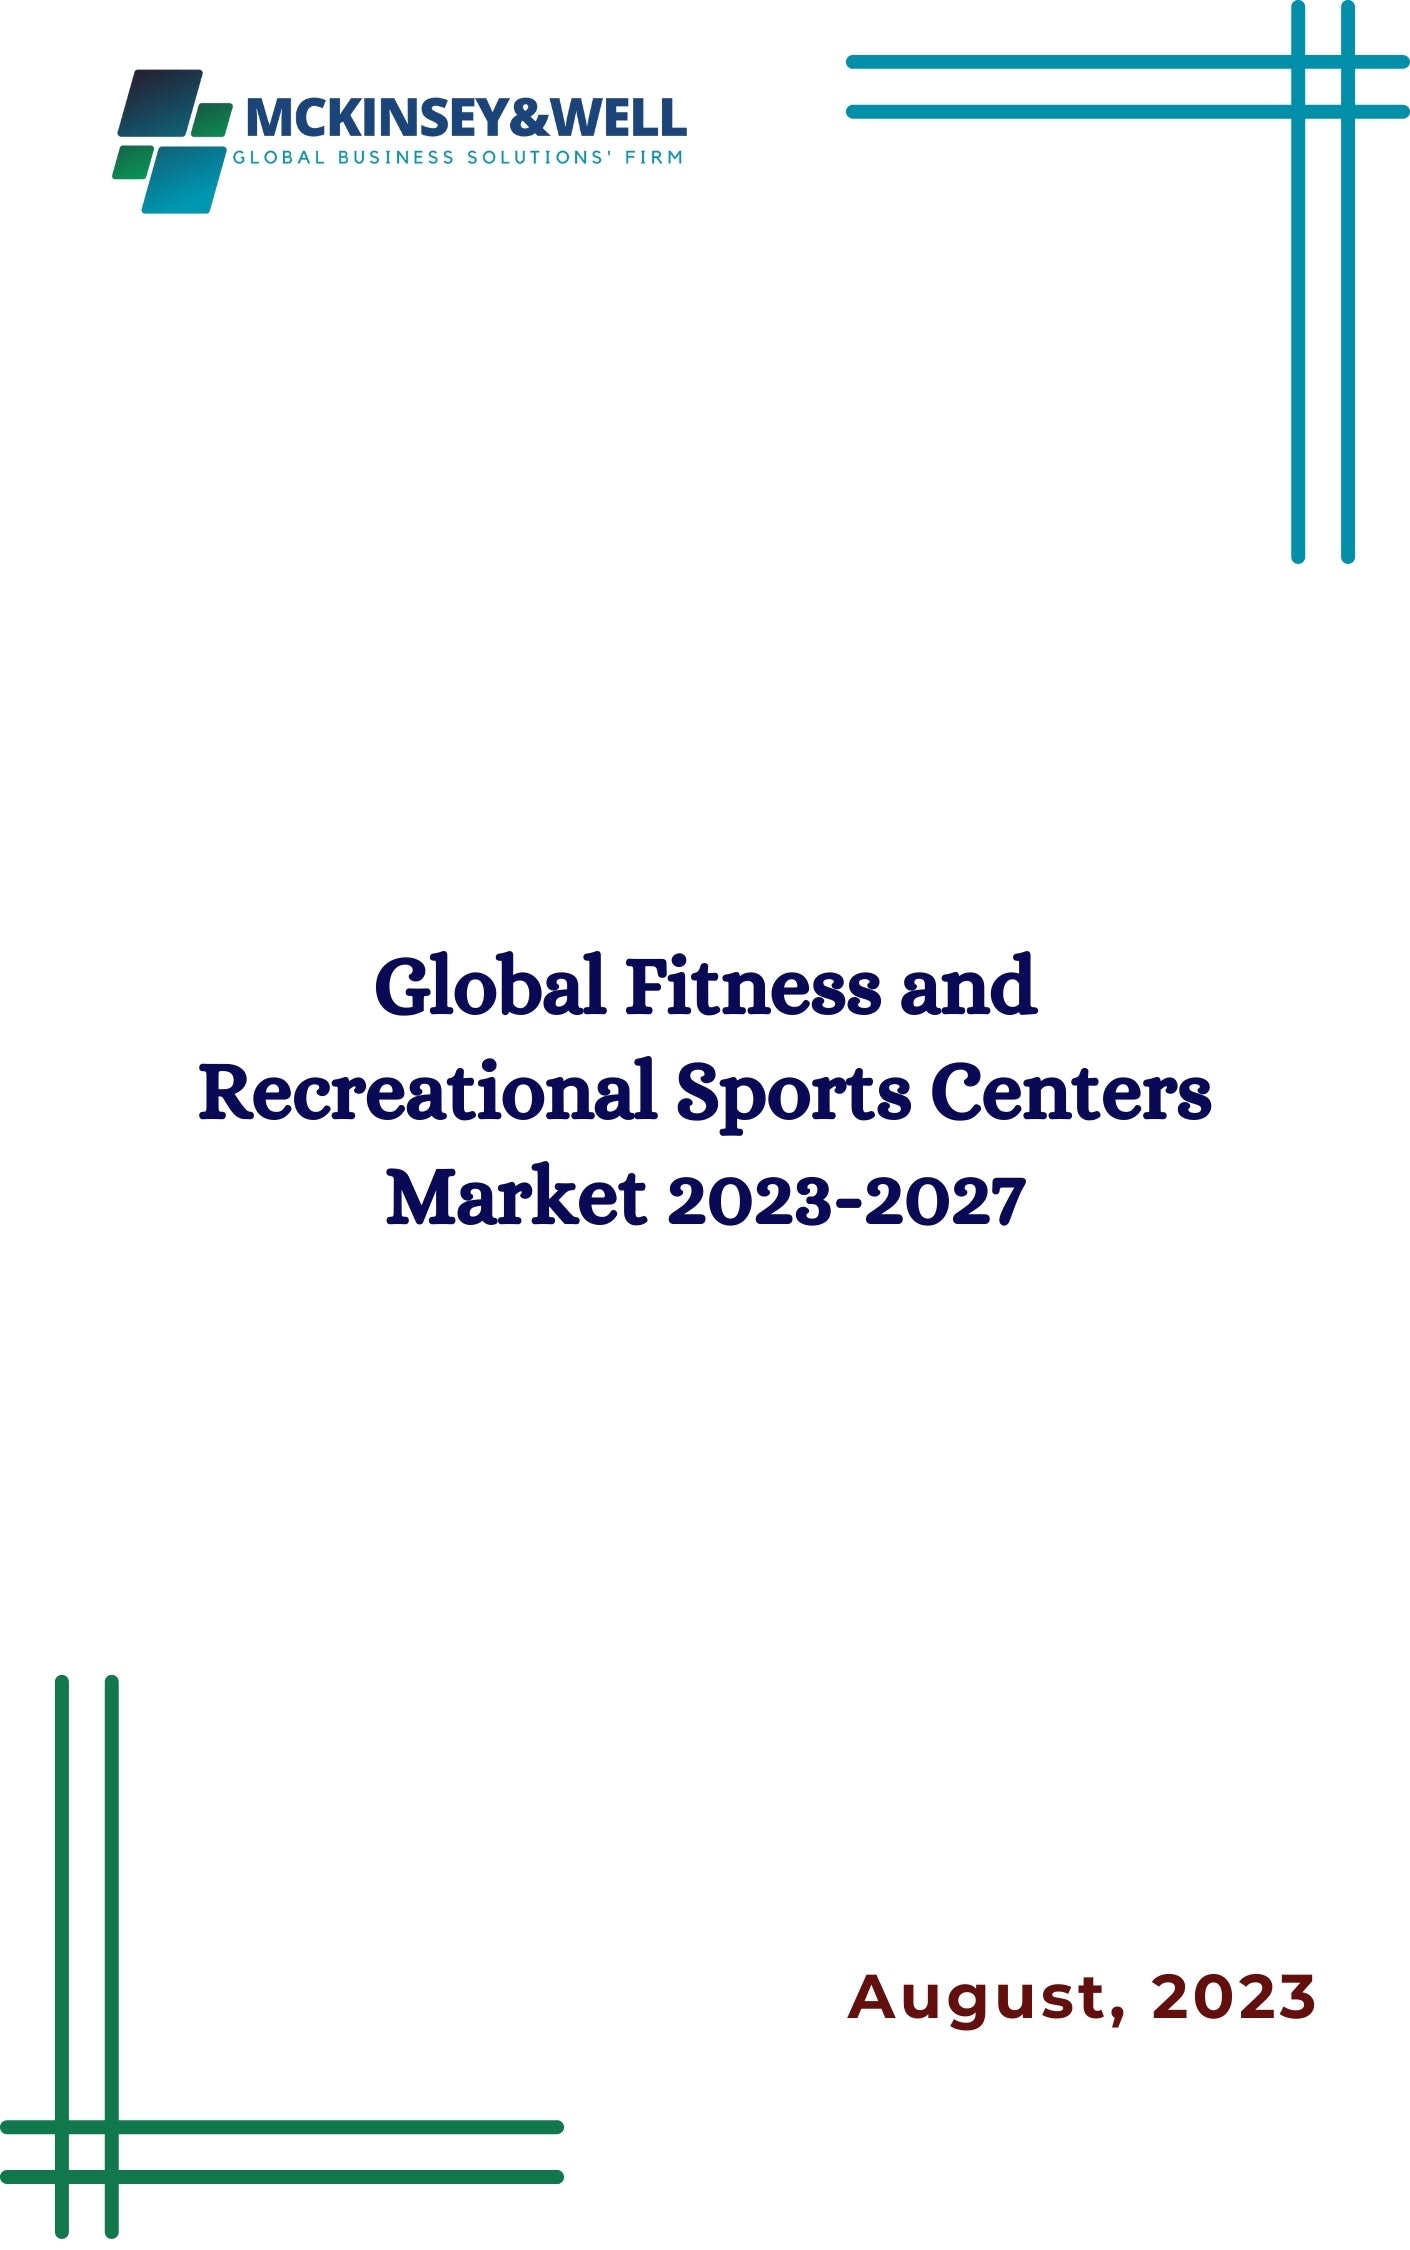 Global Fitness and Recreational Sports Centers Market 2023-2027